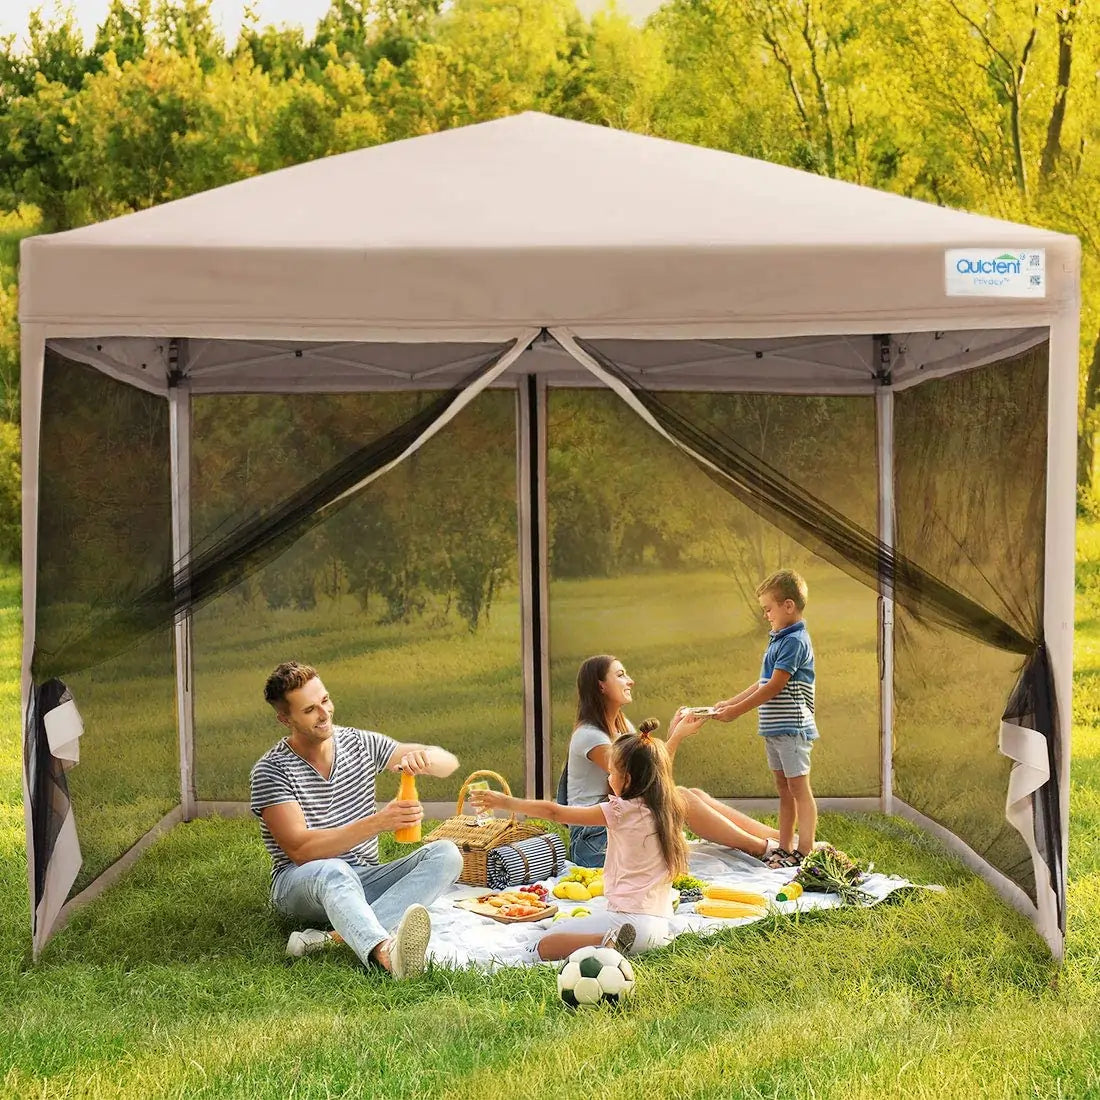 6.6. Pop Up Canopy Tent With Netting